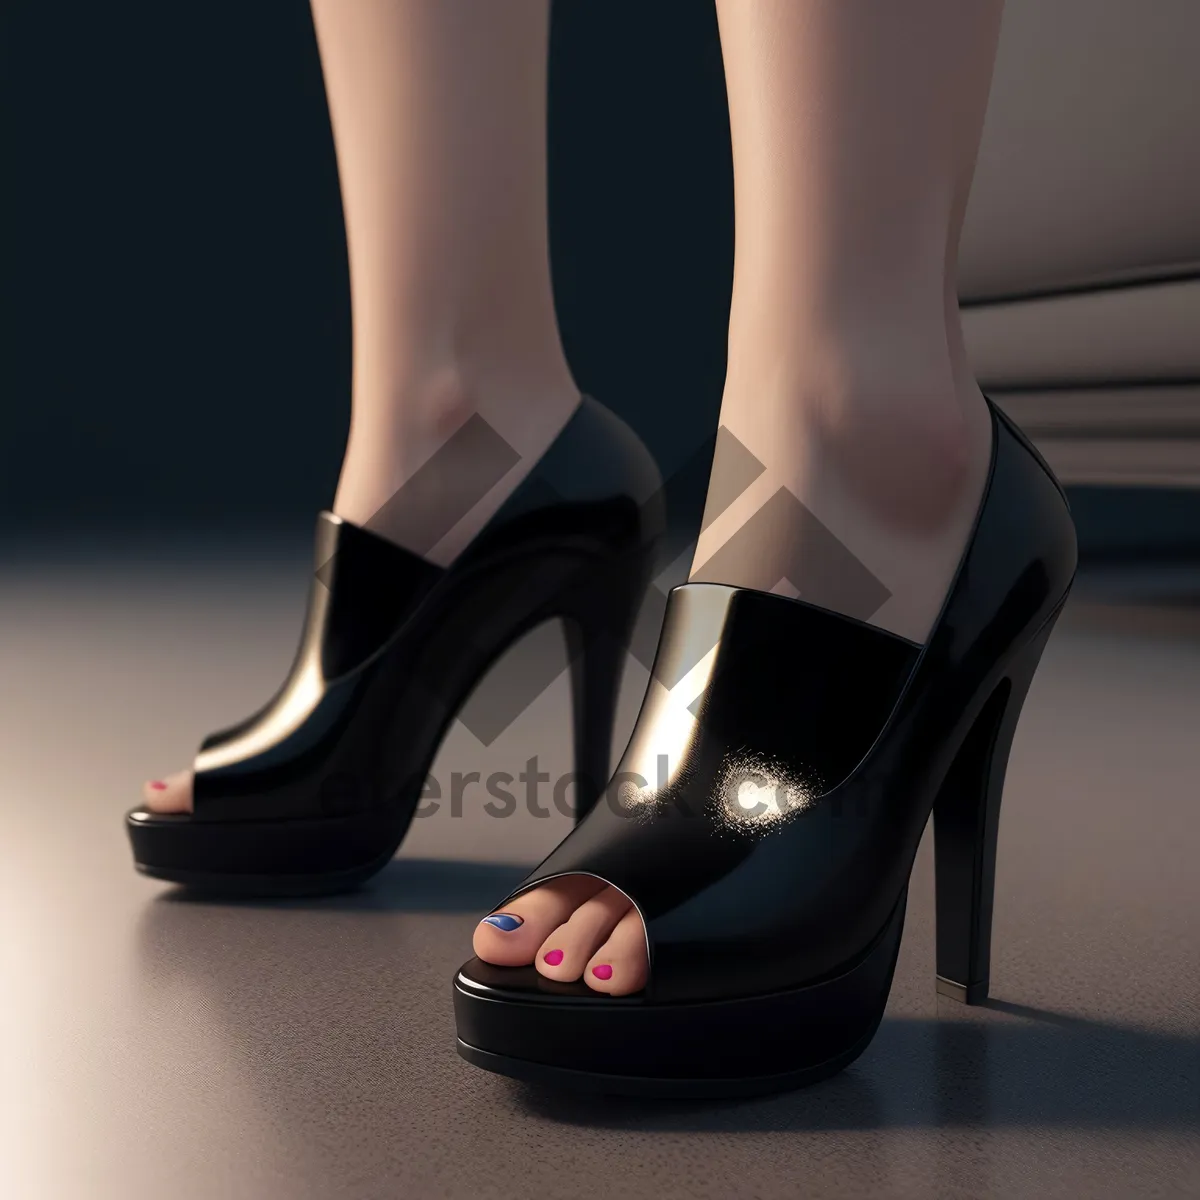 Picture of Arctic Footwear - Sexy Black Heels for Frigid Zone Fashion